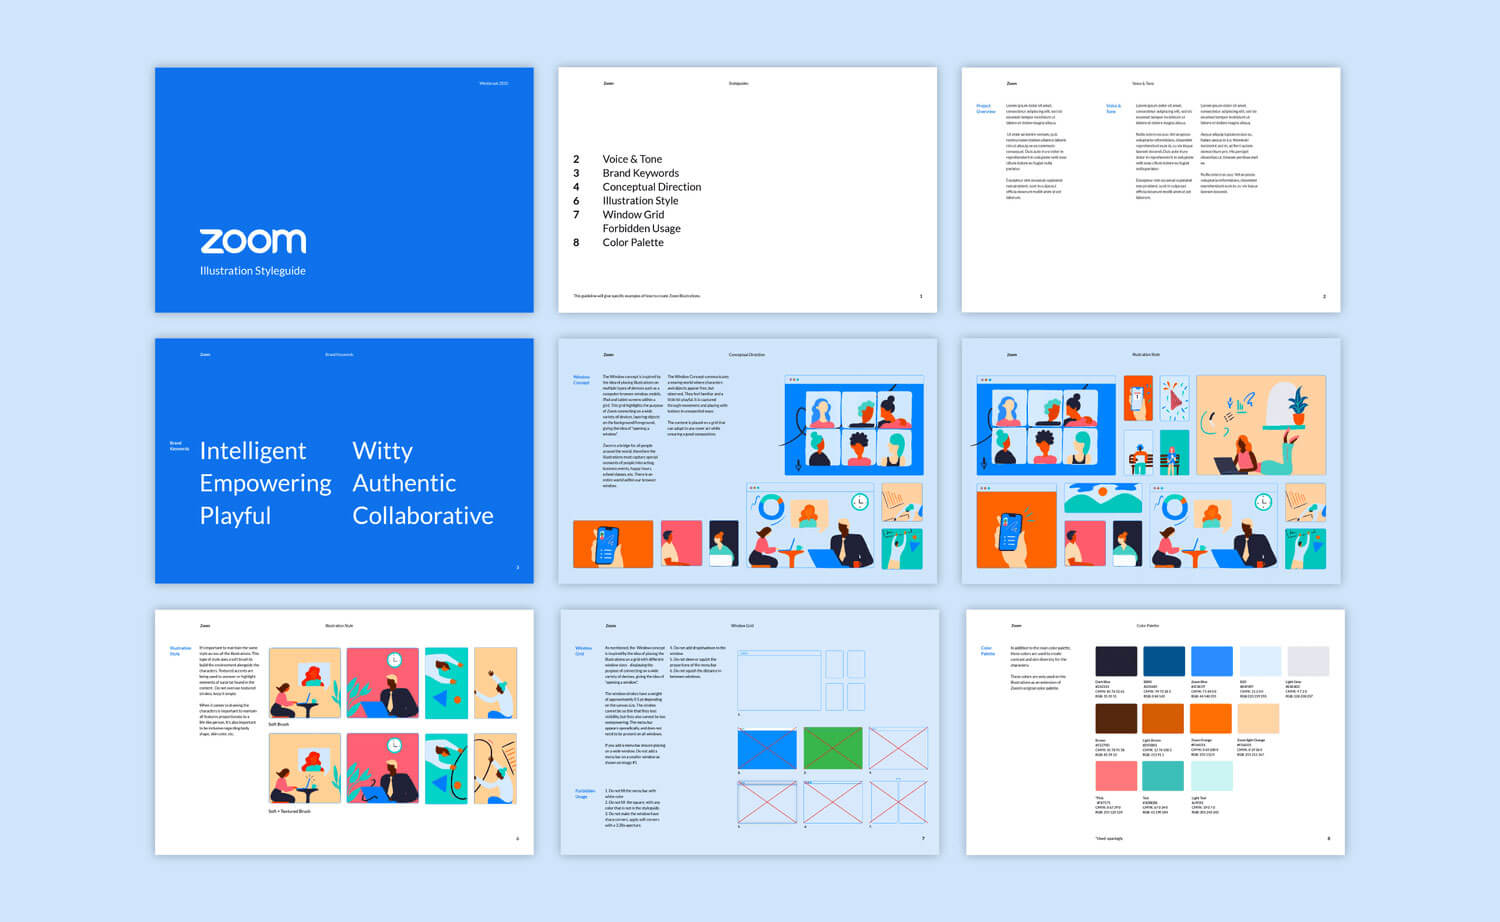 Zoom Asset Styleguides Cover